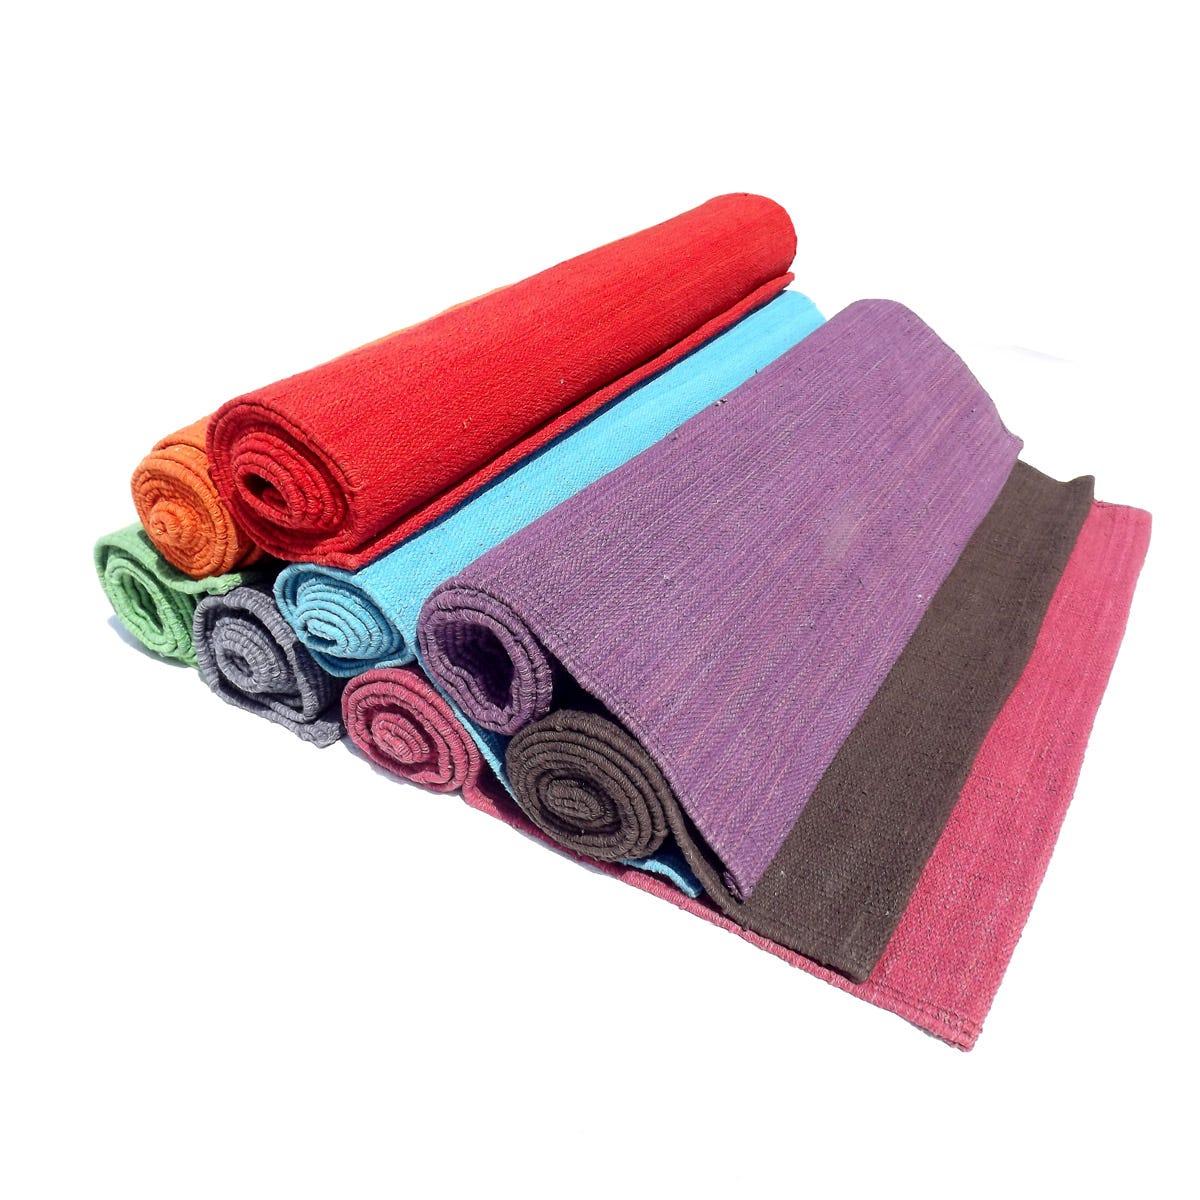 What's Your Yoga Mat Made Of?